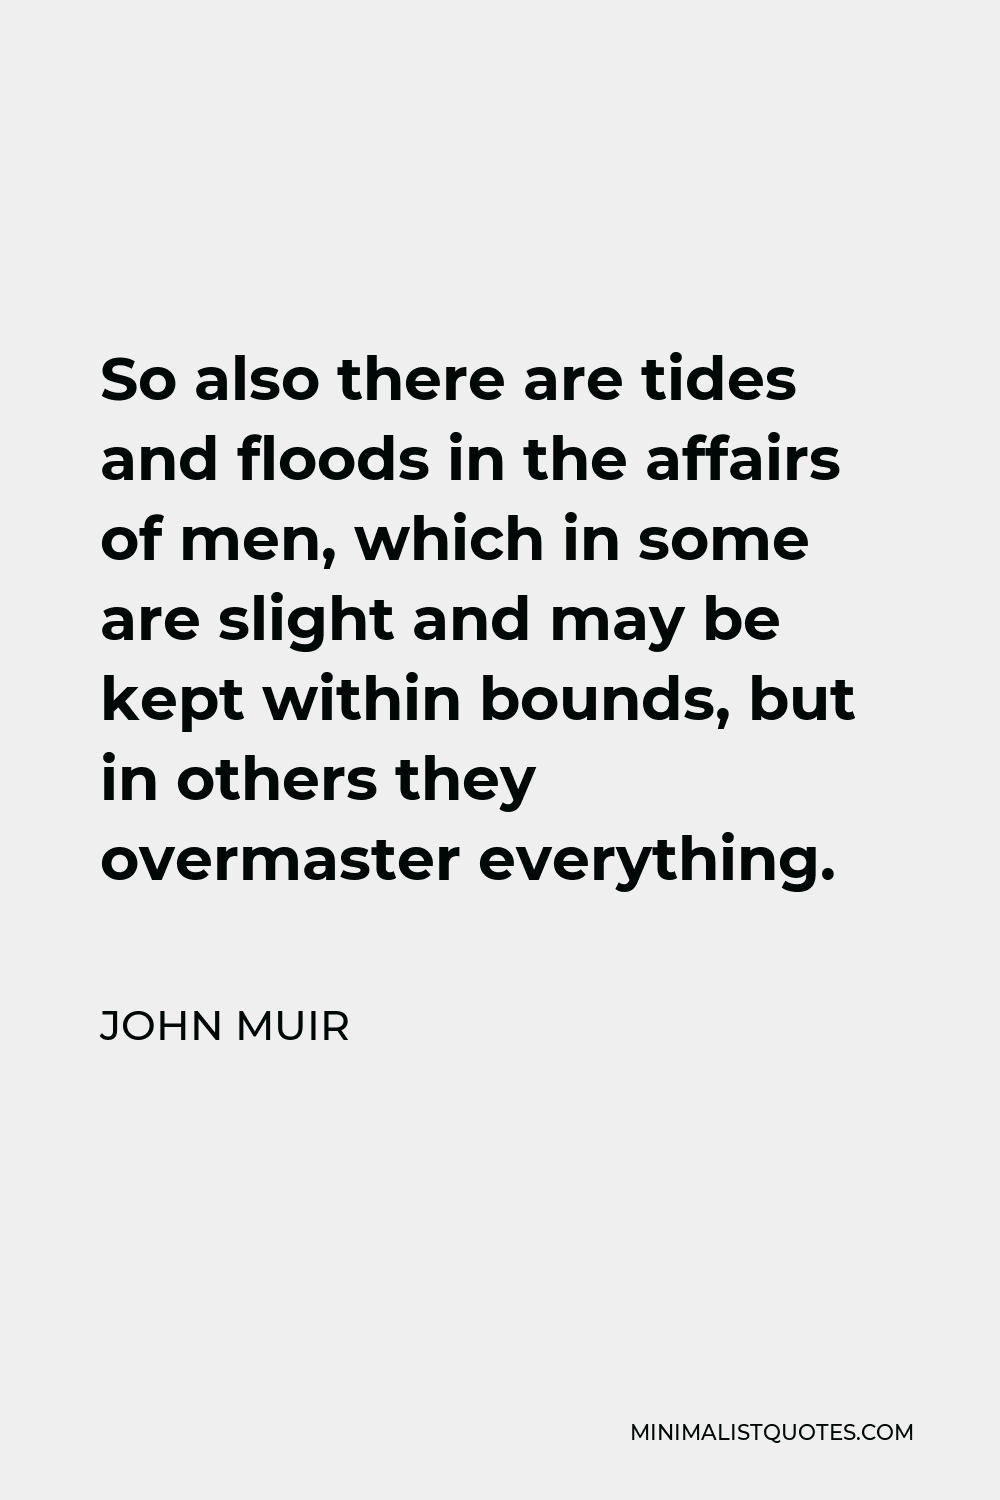 John Muir Quote - So also there are tides and floods in the affairs of men, which in some are slight and may be kept within bounds, but in others they overmaster everything.